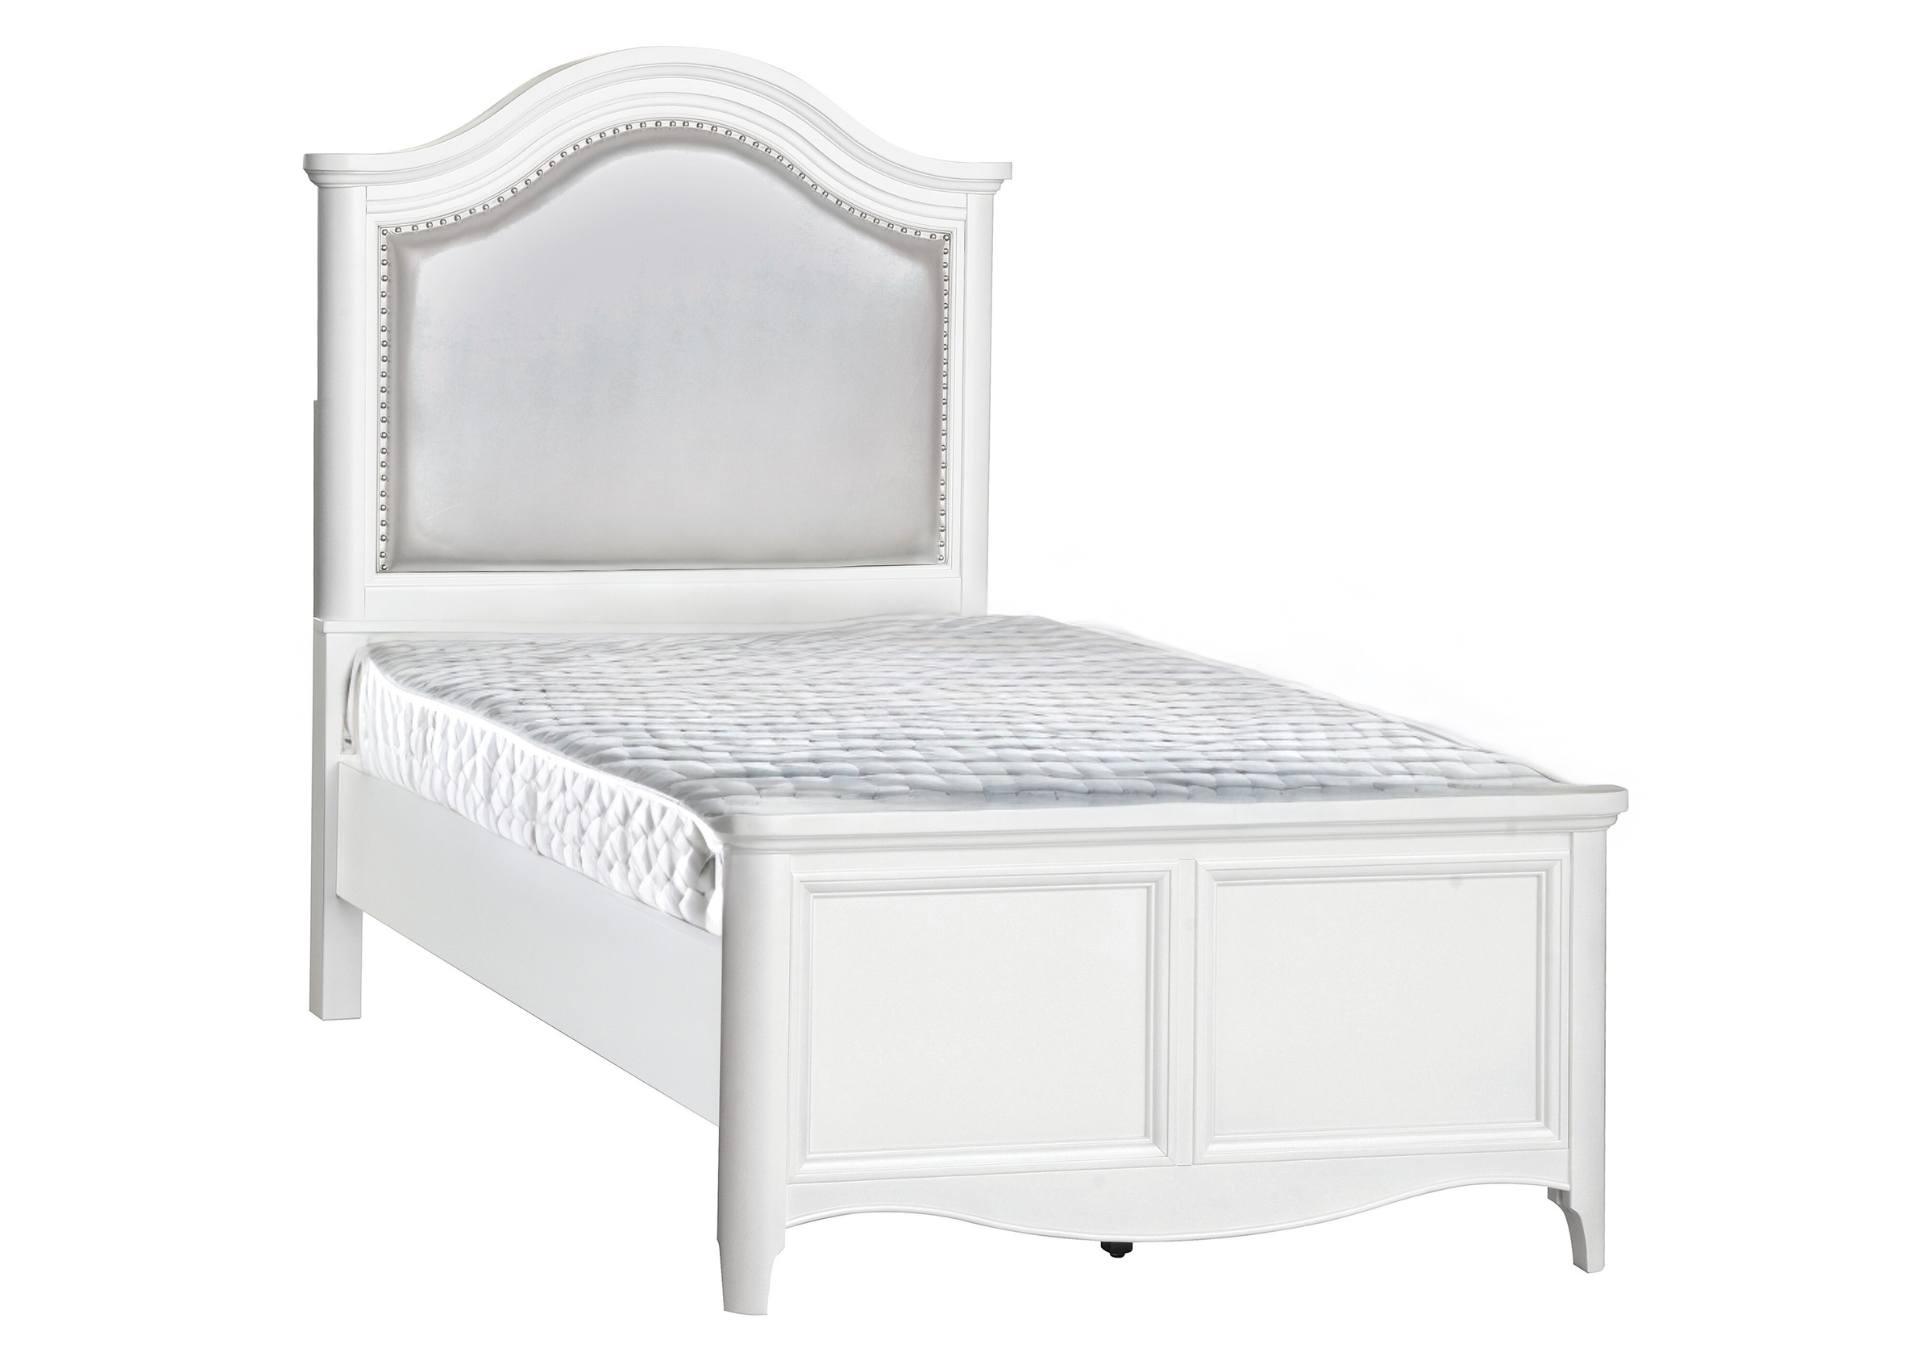 CHELSEA TWIN PANEL BED,SAMUEL LAWRENCE FURNITURE